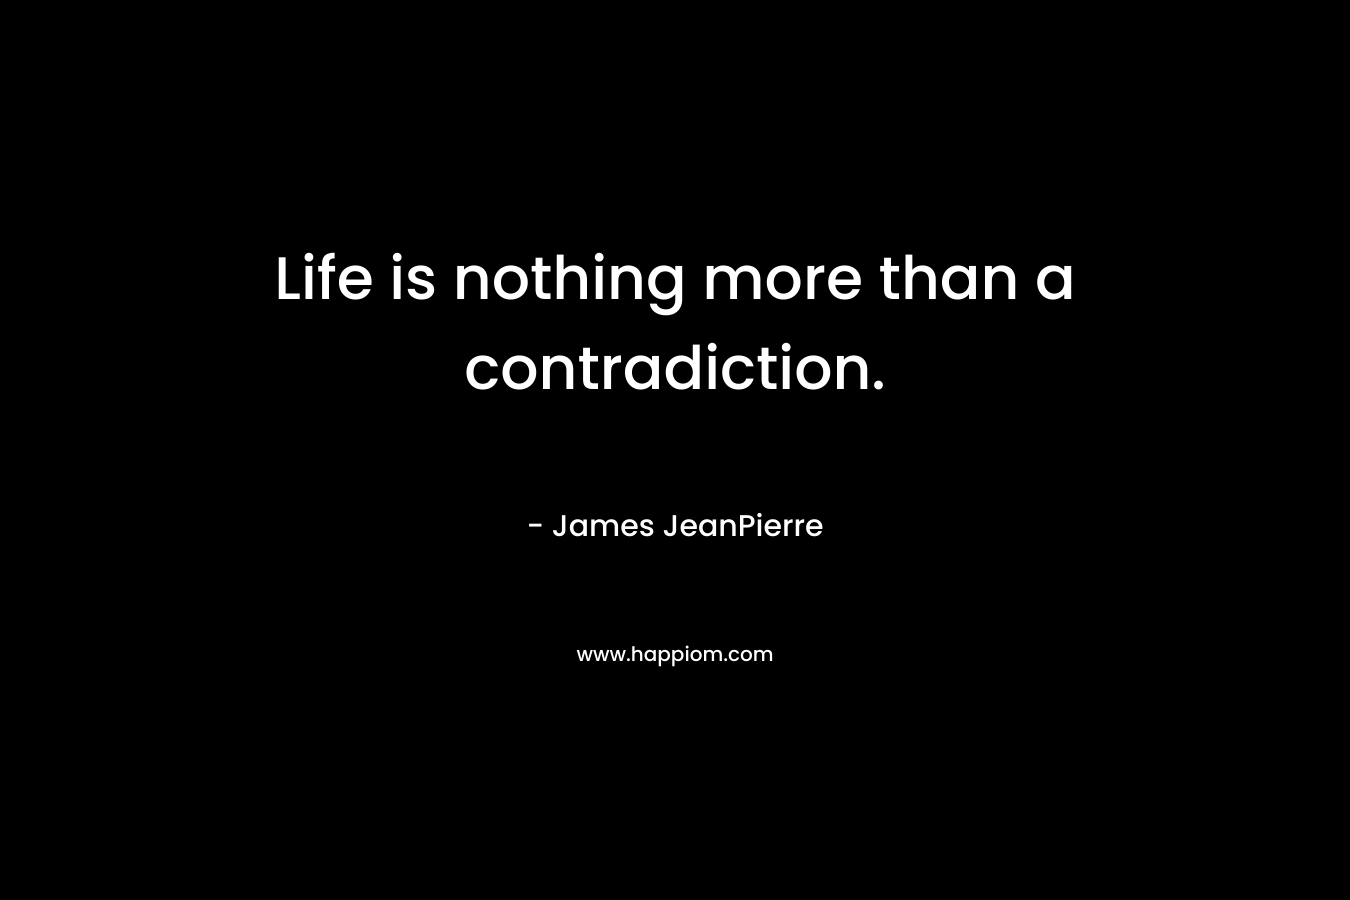 Life is nothing more than a contradiction. – James JeanPierre